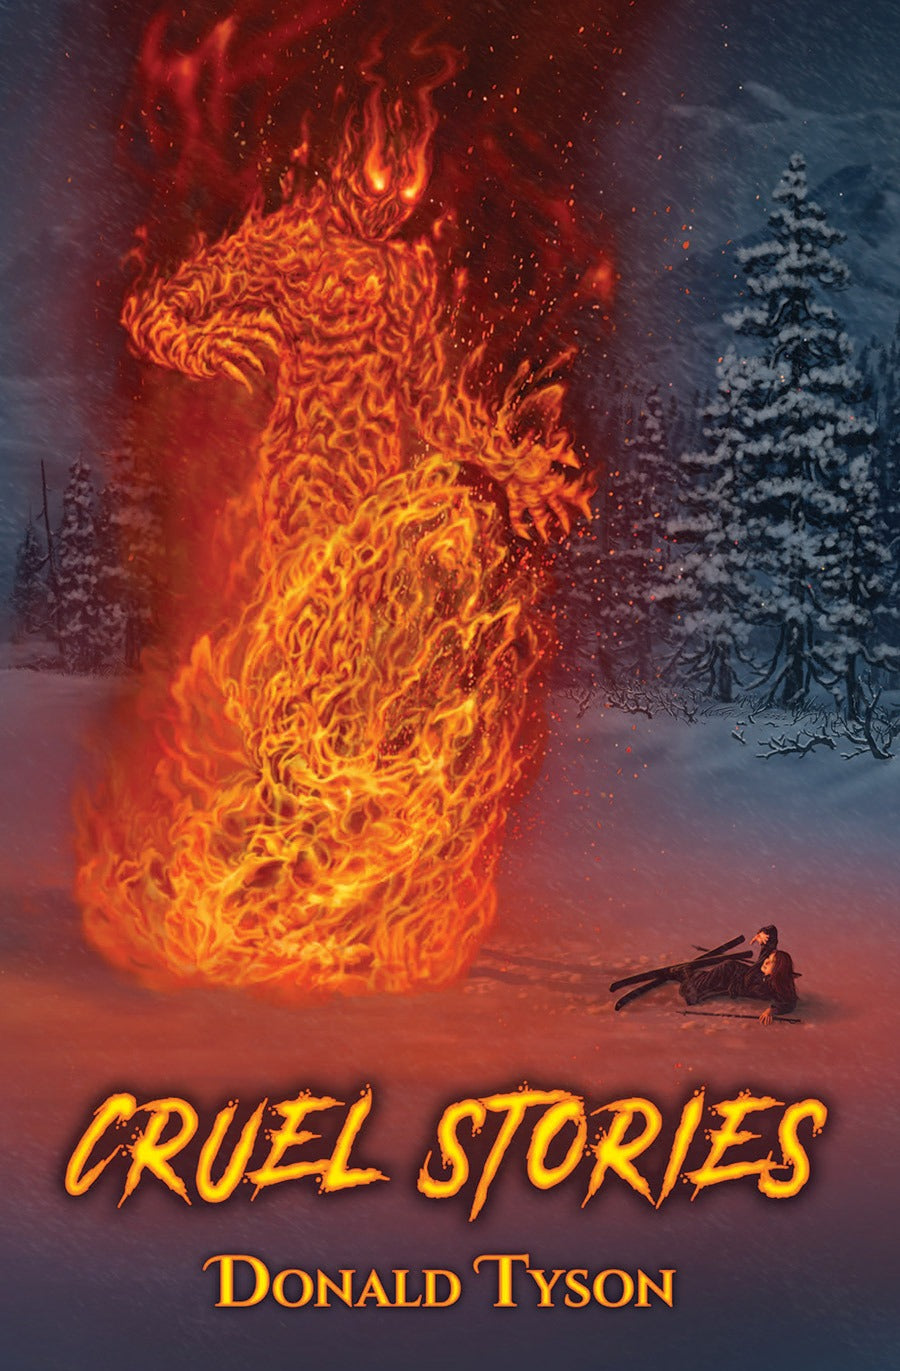 Cruel Stories by Donald Tyson Trade Paperback